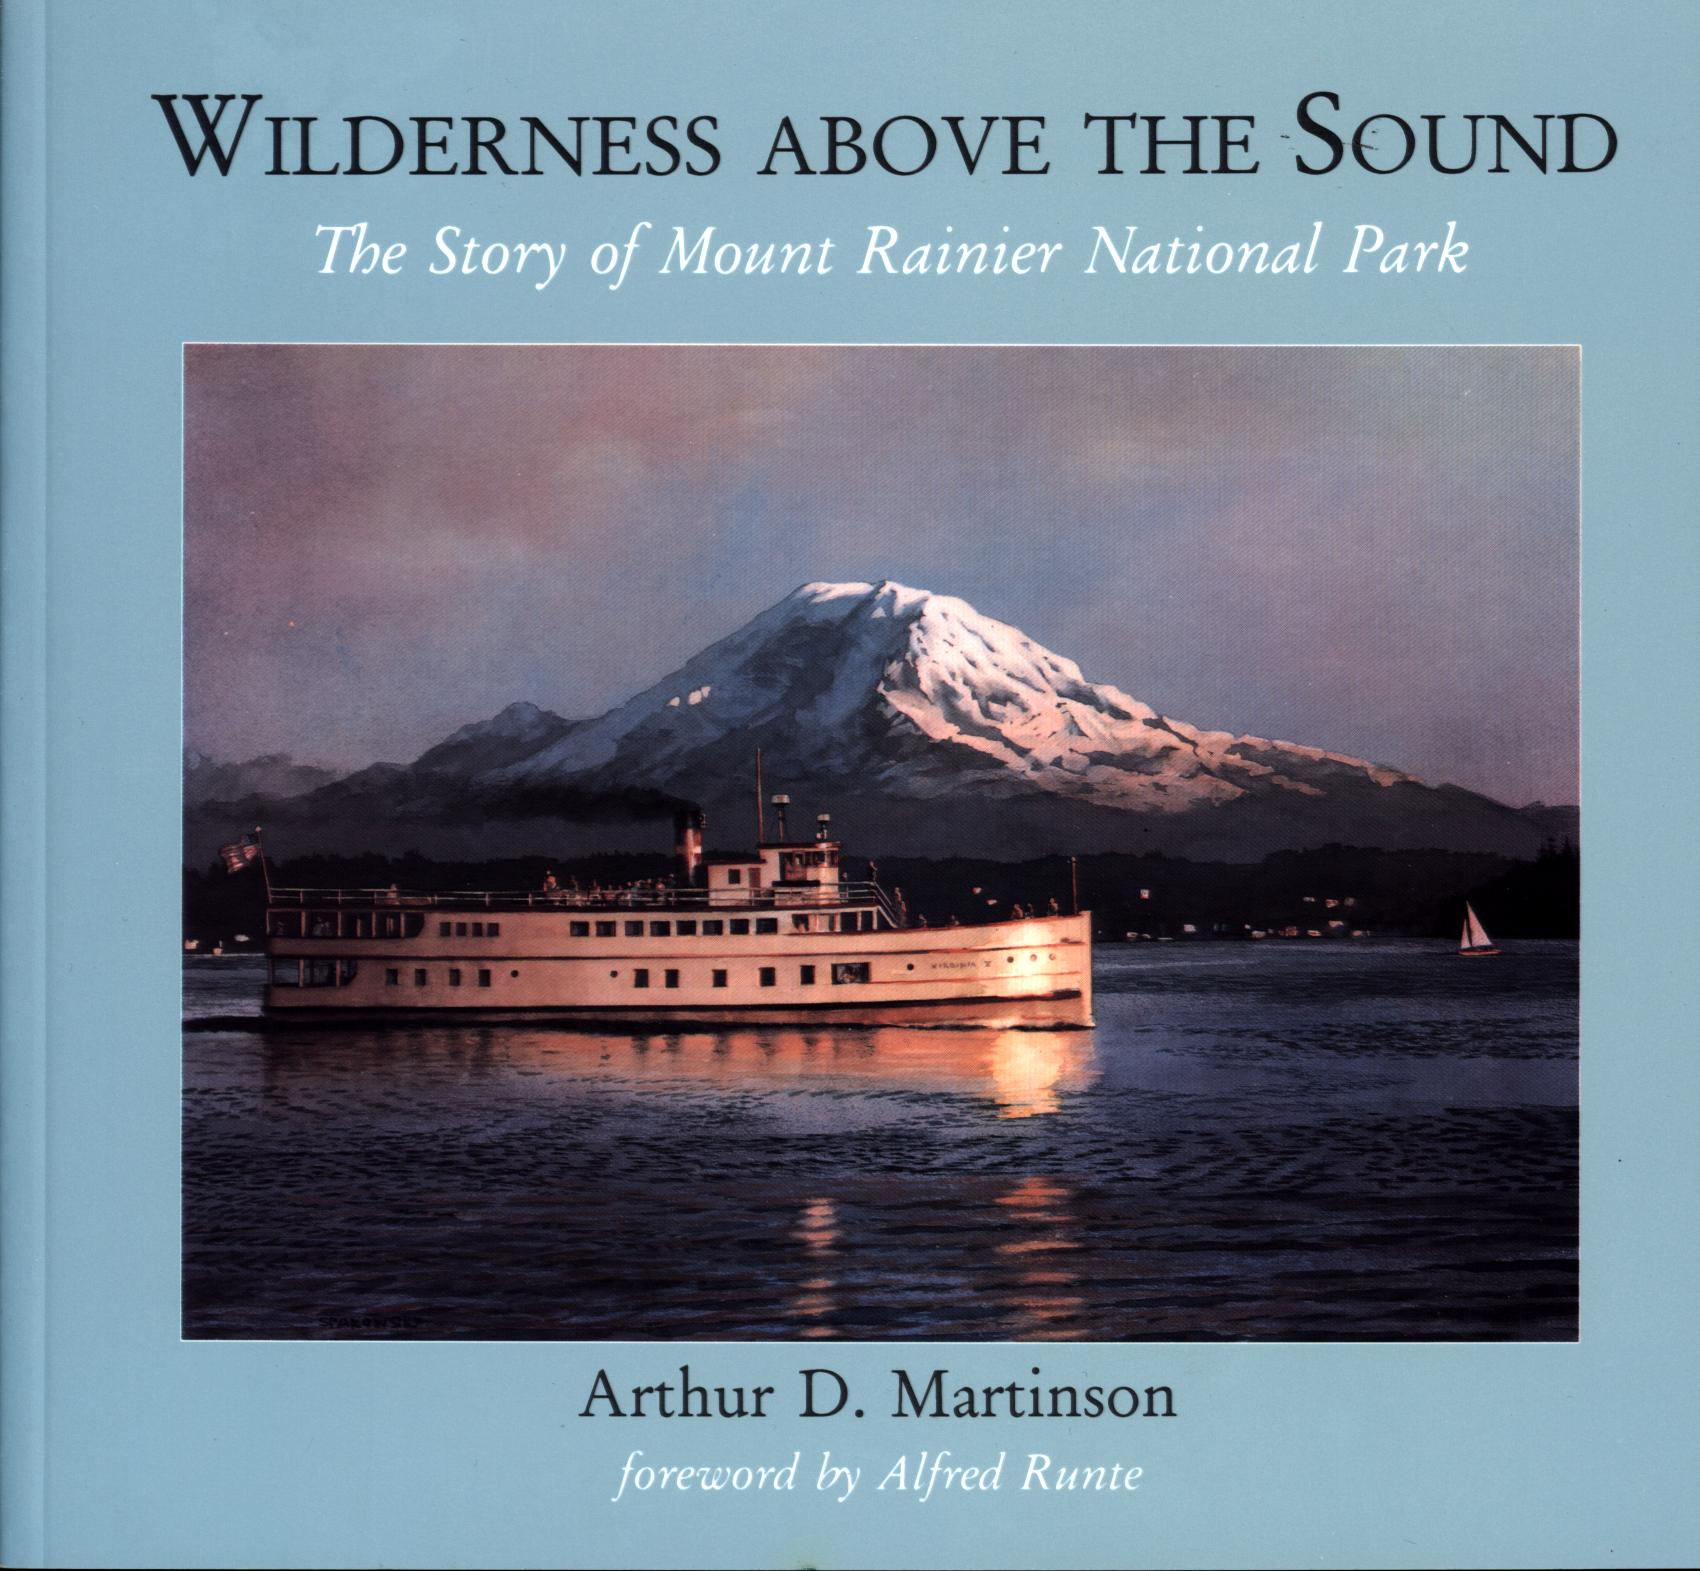 WILDERNESS ABOVE THE SOUND: the story of Mount Rainier National Park. 